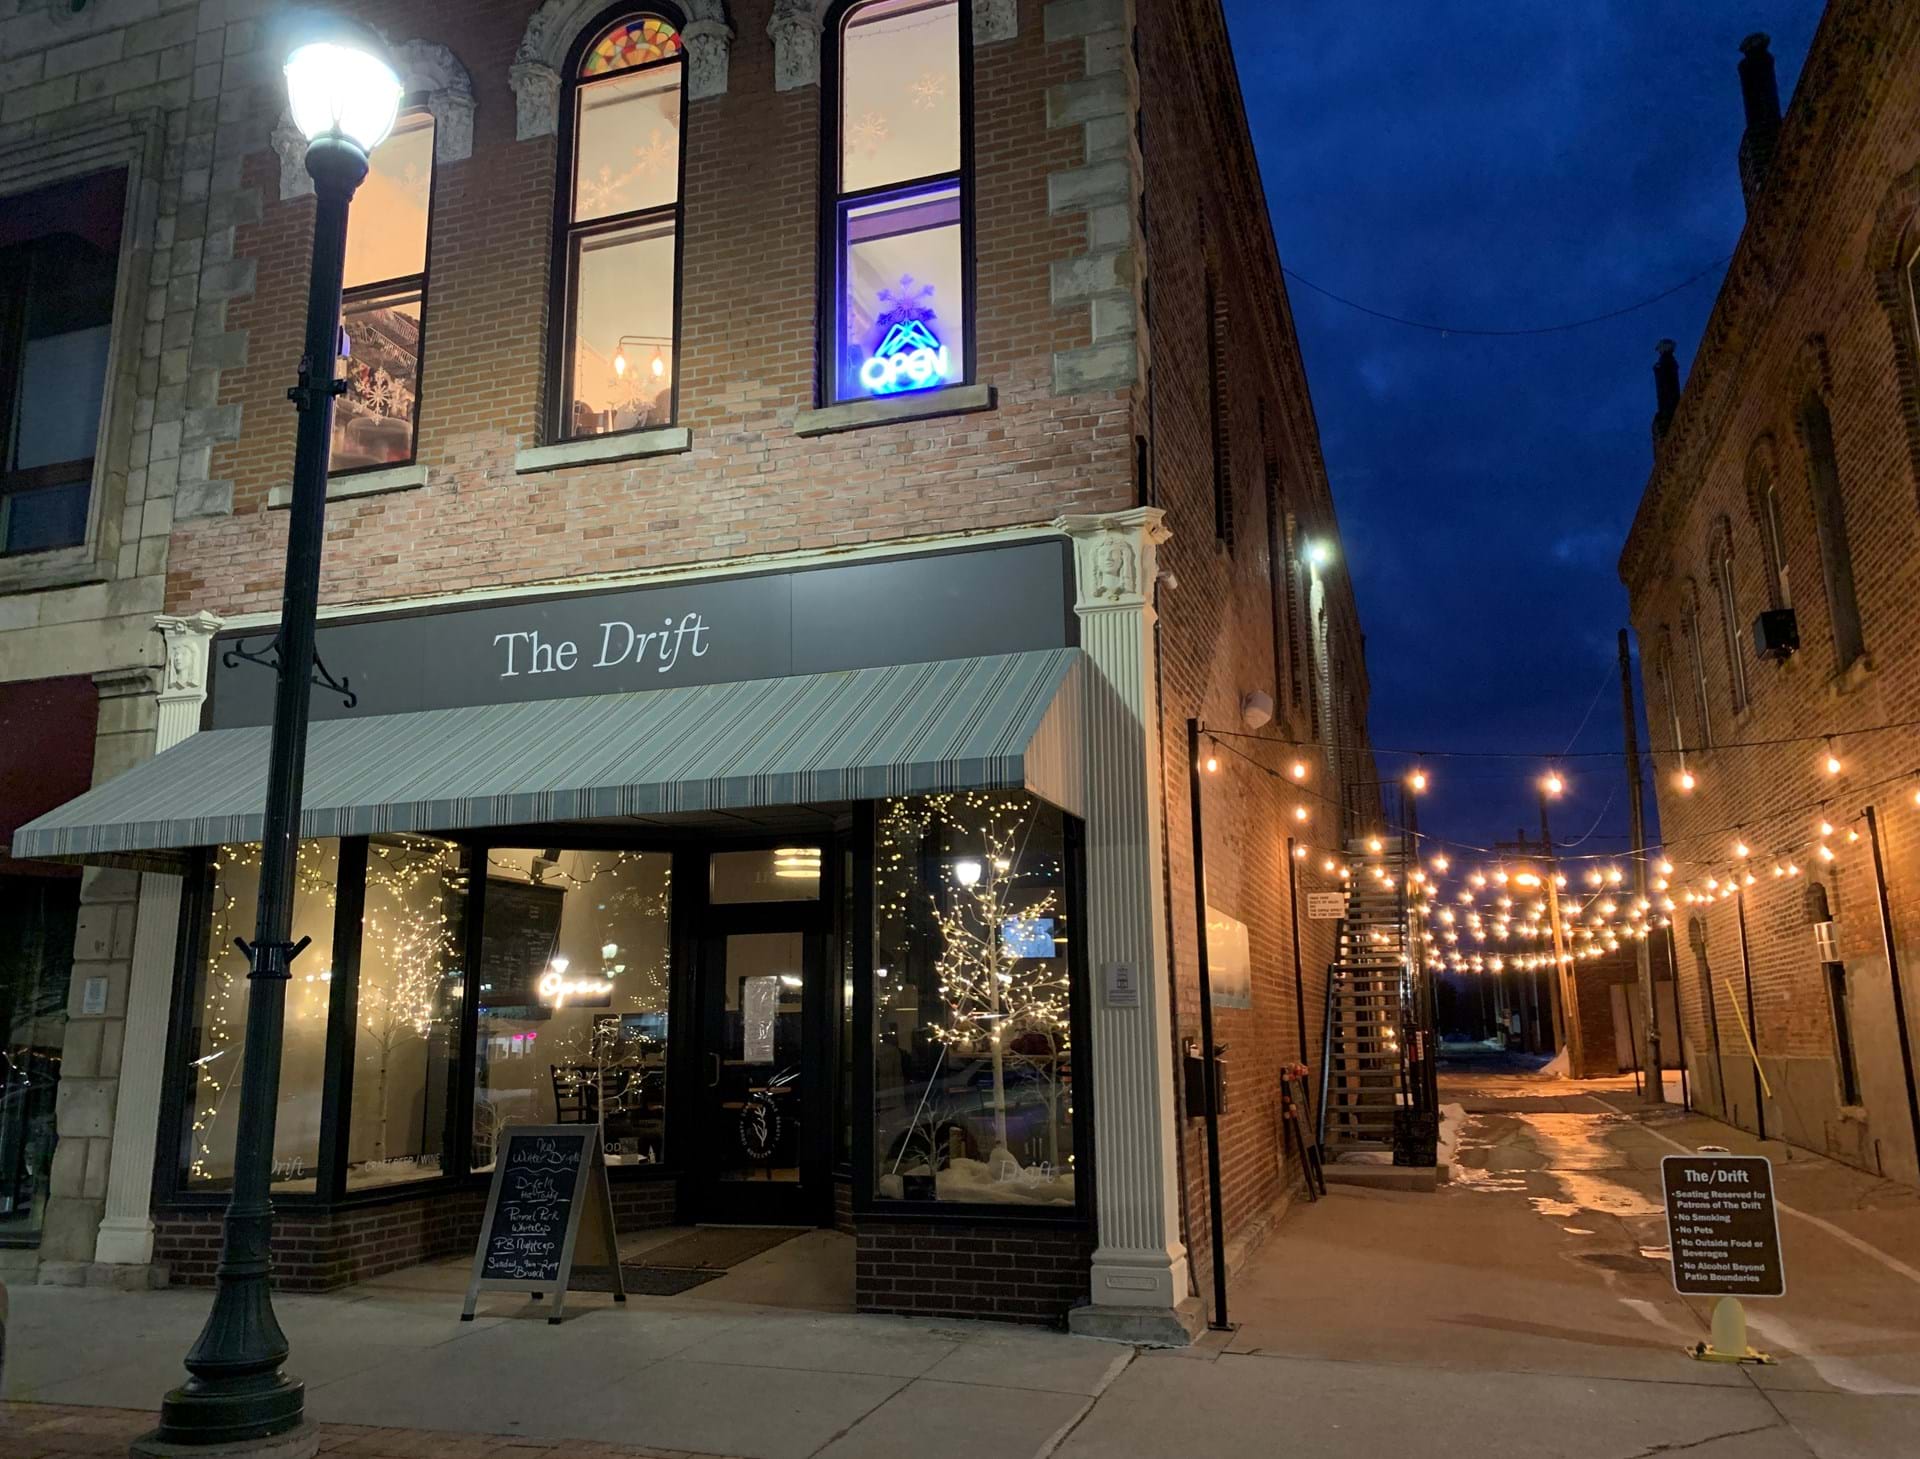 Located in a historic building right on the Winterset square.